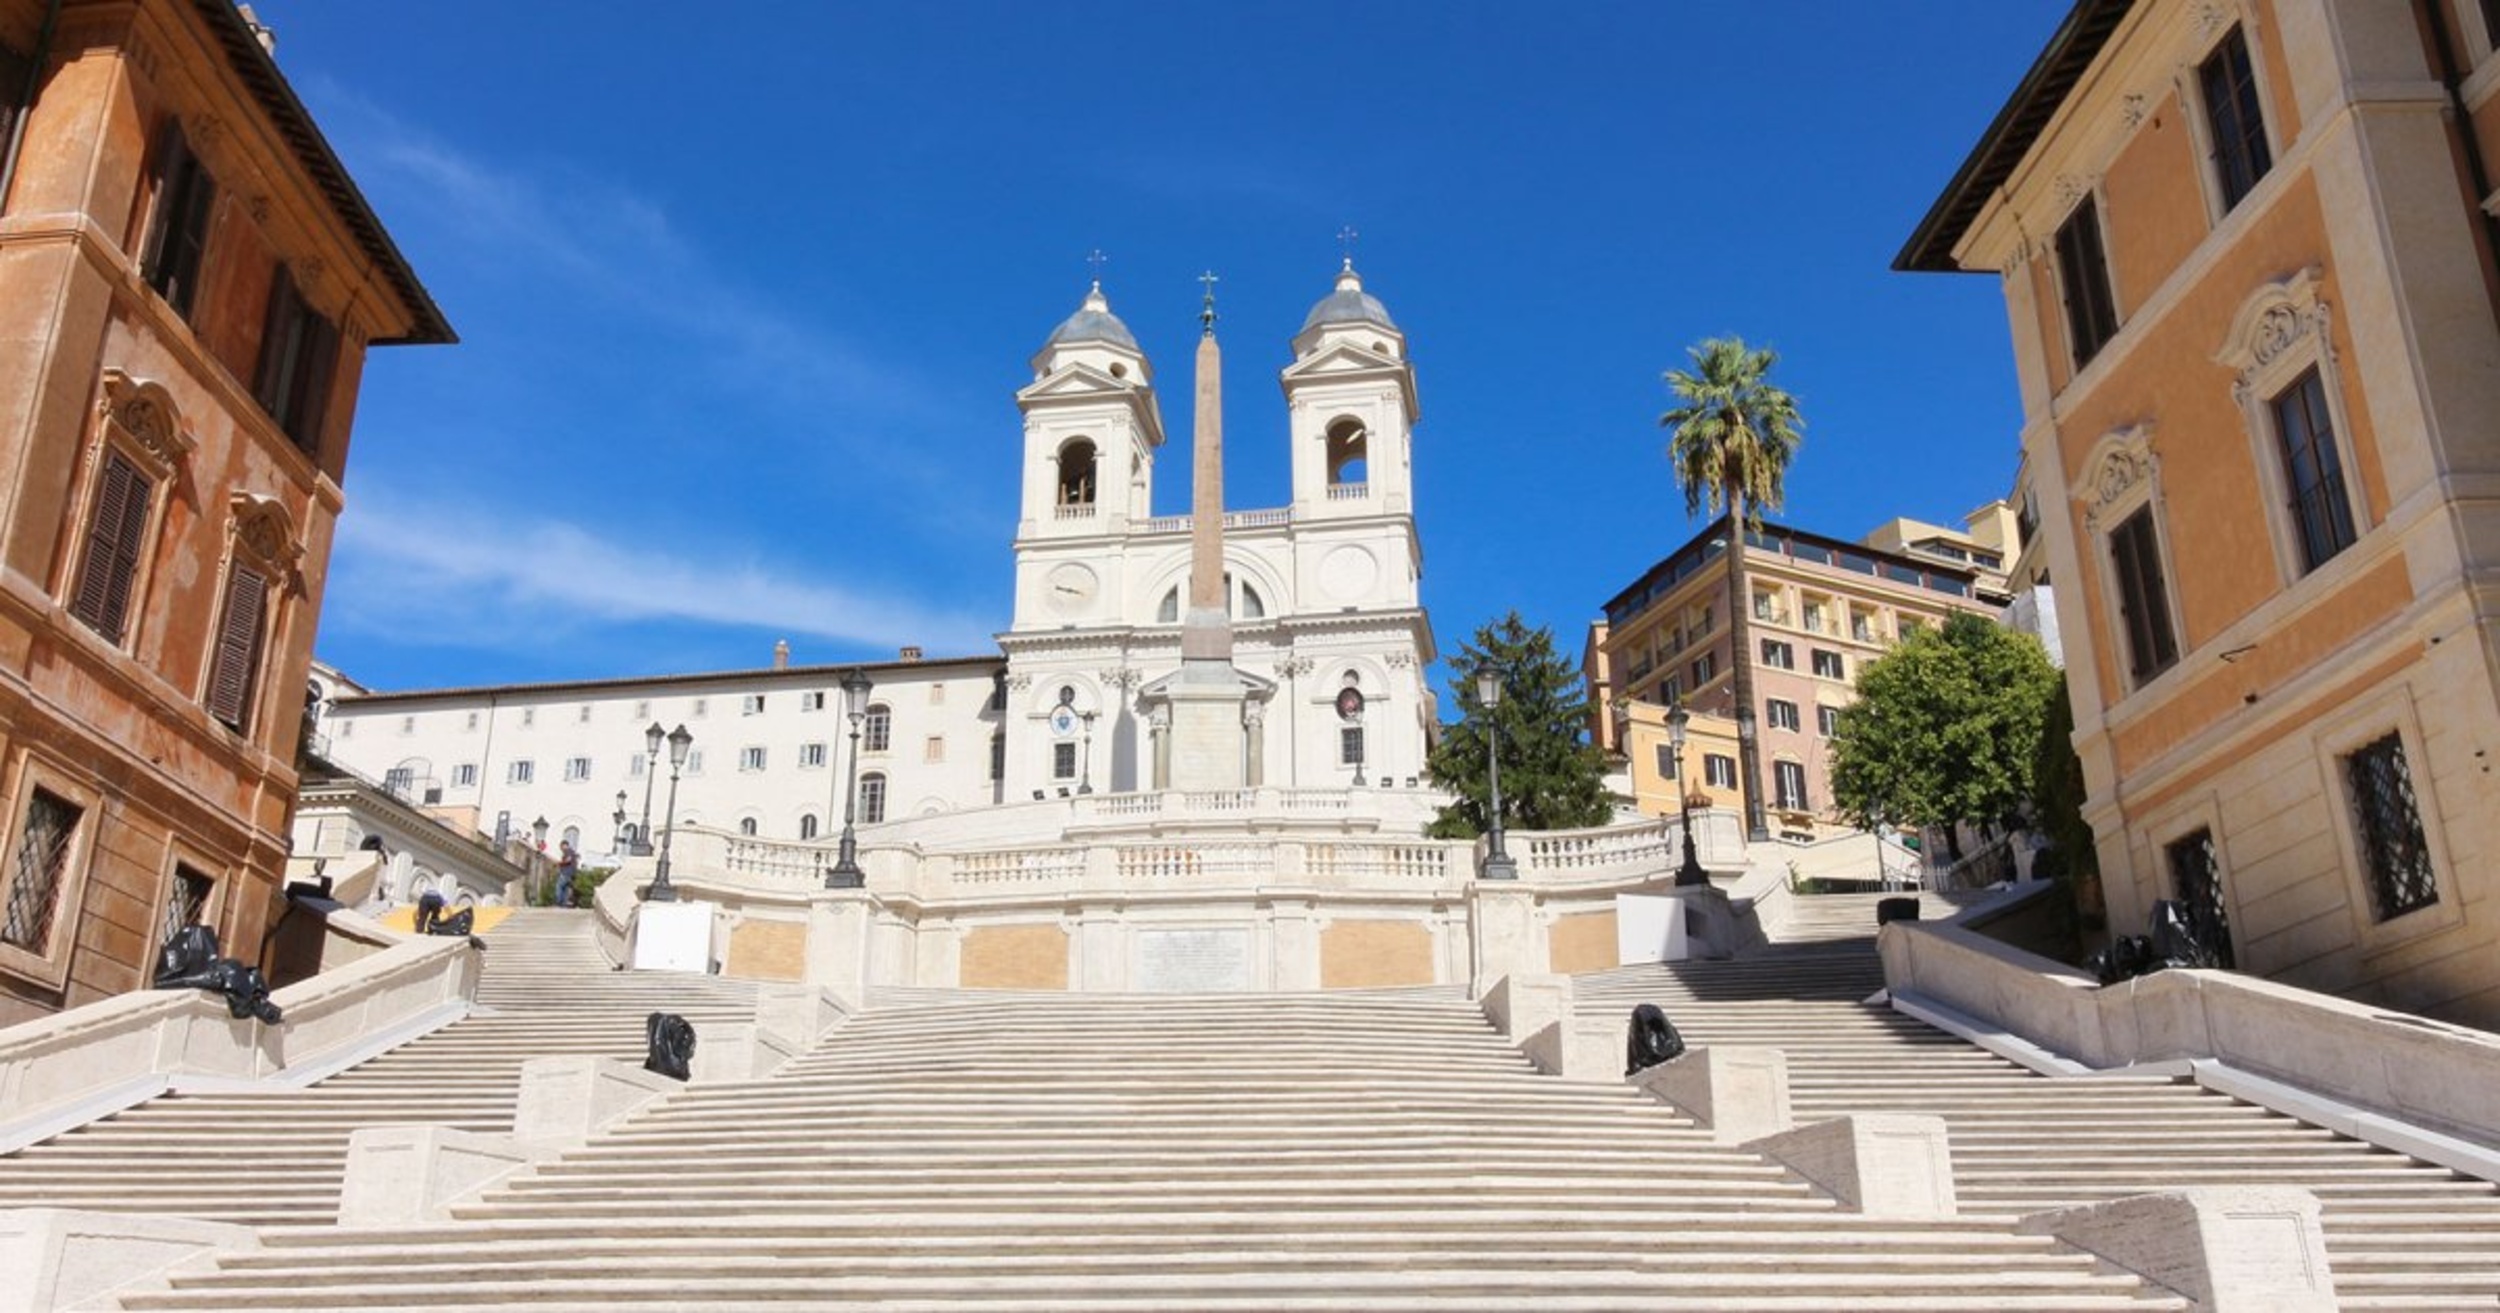 <p>Walking is the perfect way to burn off pasta, so the Spanish Steps make for a perfect afternoon activity. The staircase connecting Piazza di Spagna to the Spanish Embassy is filled with magical sights, from kids splashing in the fountain to emeralds glowing in the embassy. </p><p>You may also like: <a href='https://www.yardbarker.com/lifestyle/articles/20_spinach_recipes_you_absolutely_must_try_111723/s1__39117830'>20 spinach recipes you absolutely must try</a></p>